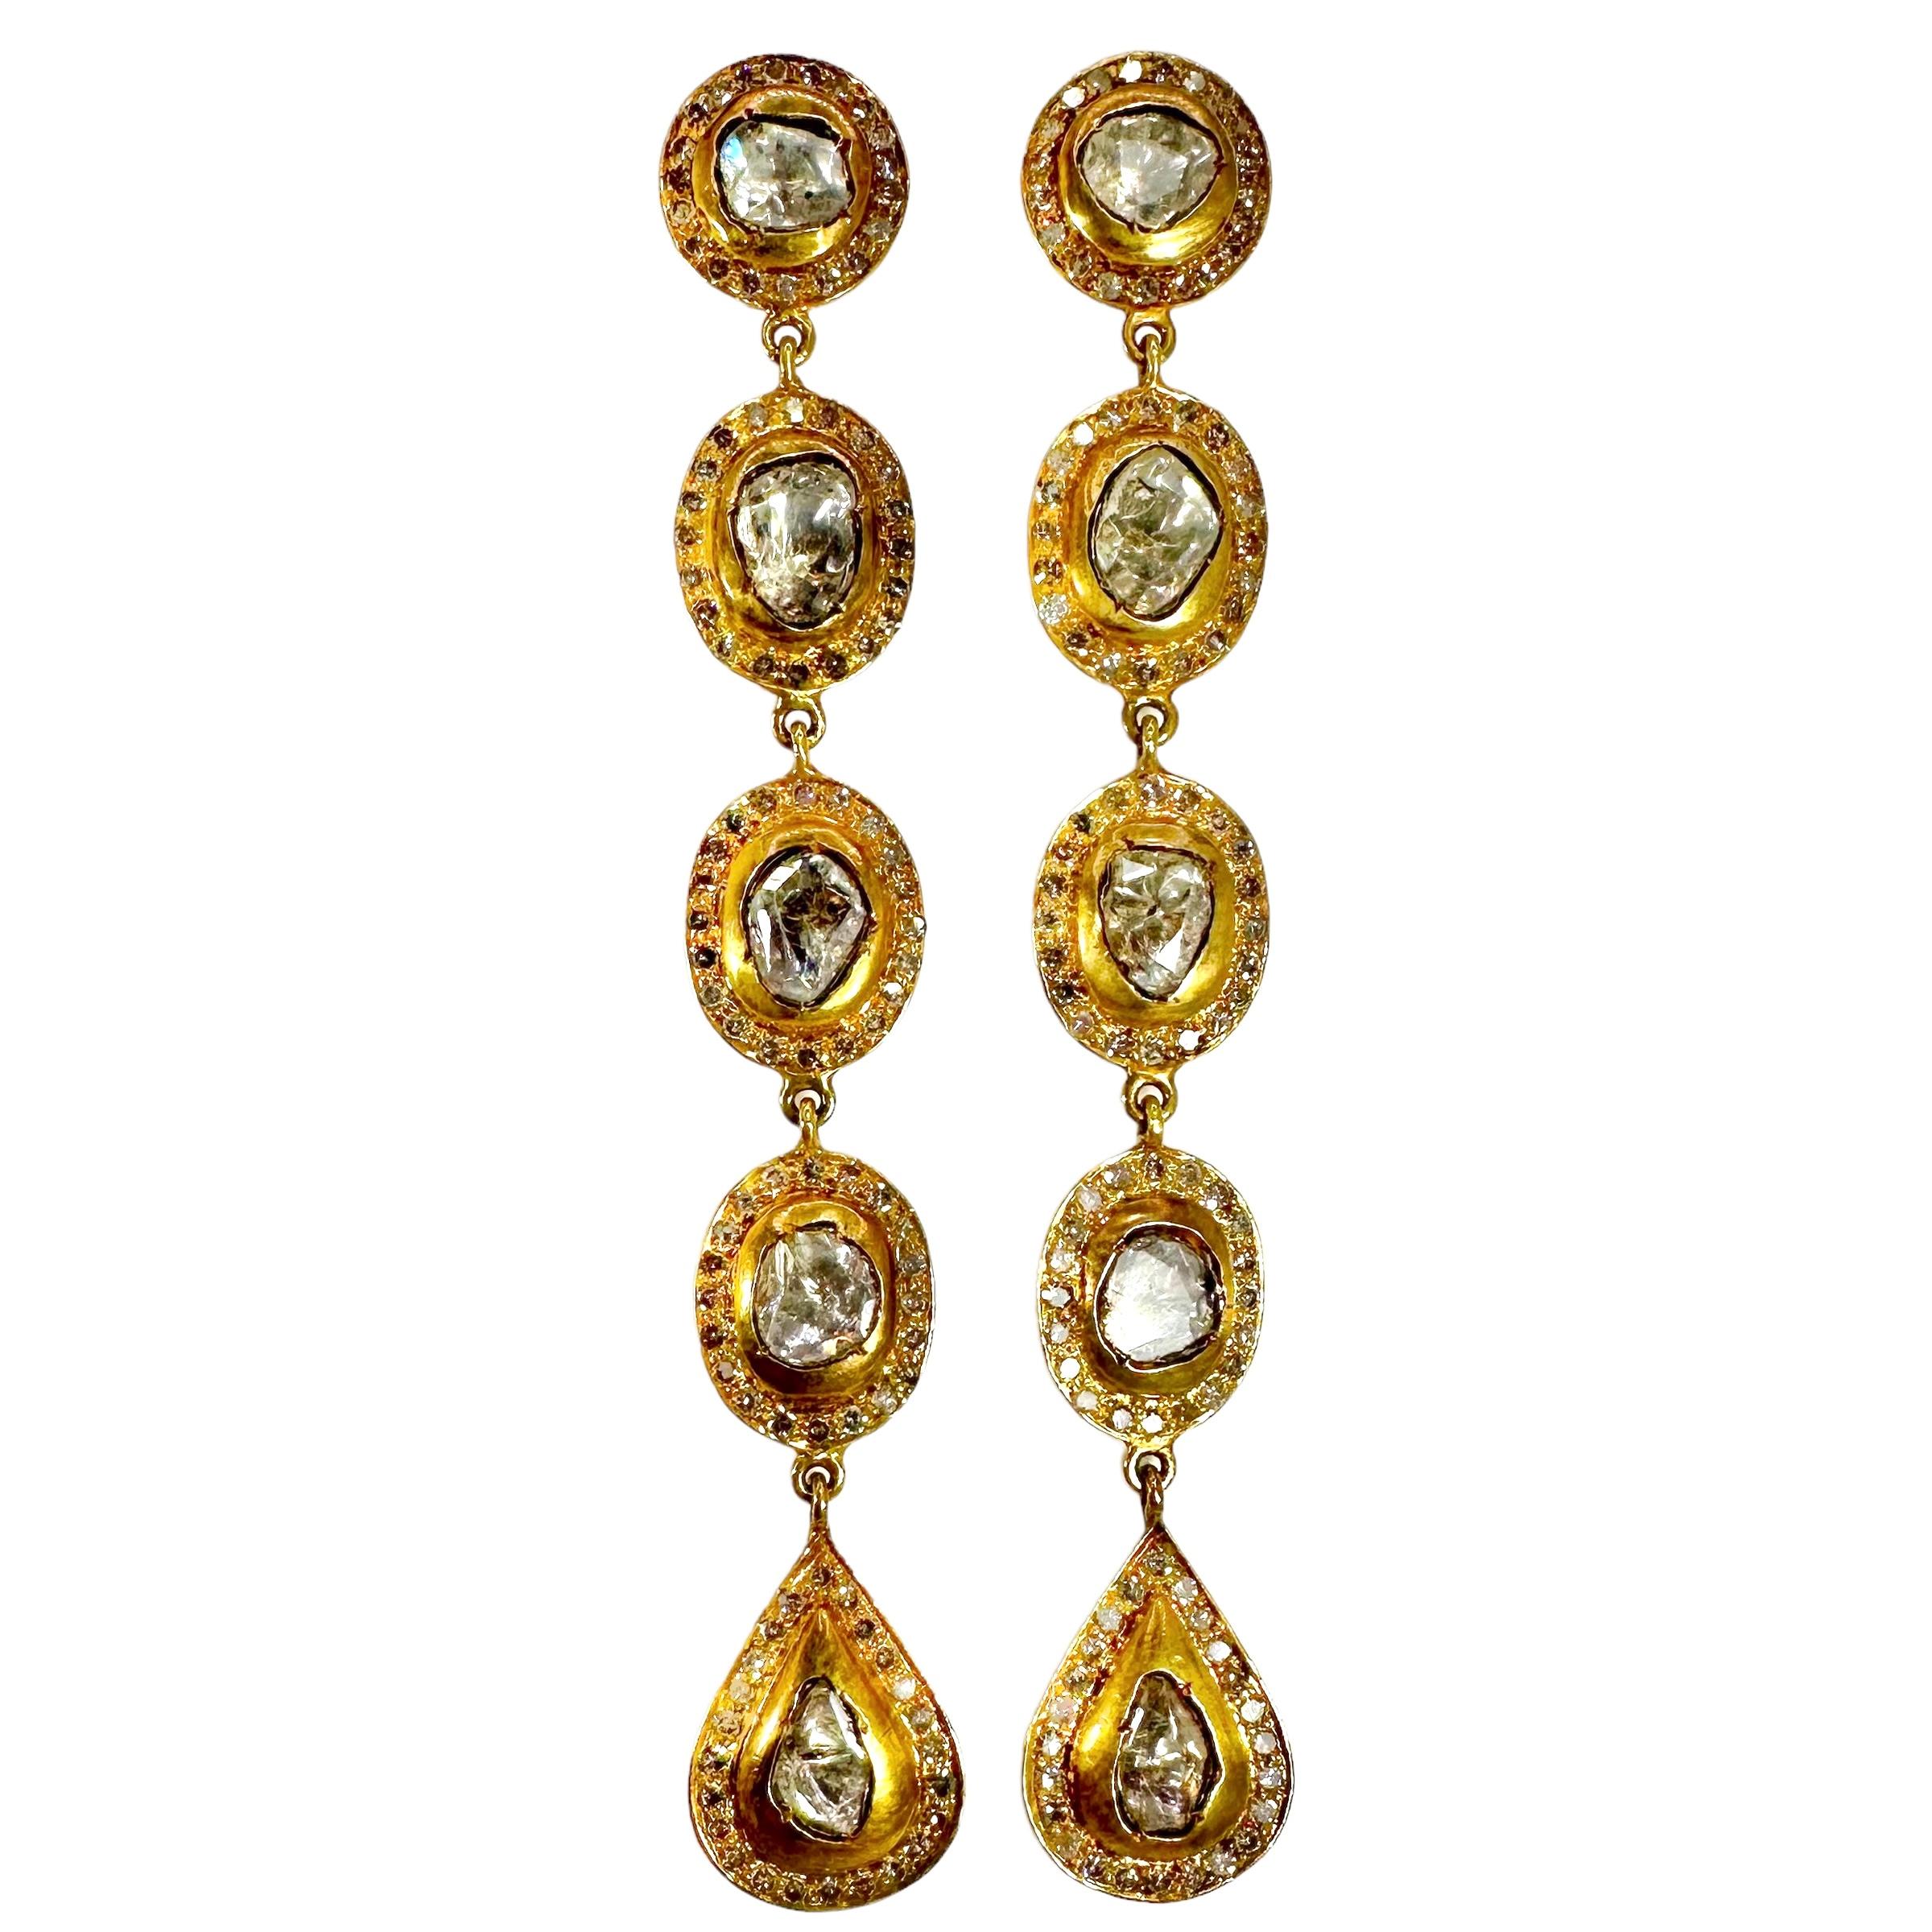 These fabulous vintage earrings were crafted in 18K yellow gold and set with various single cut diamonds surrounding larger rose cut diamonds in a halo type effect. The diamonds have a total approximate weight of 5.43ct with an overall J color and